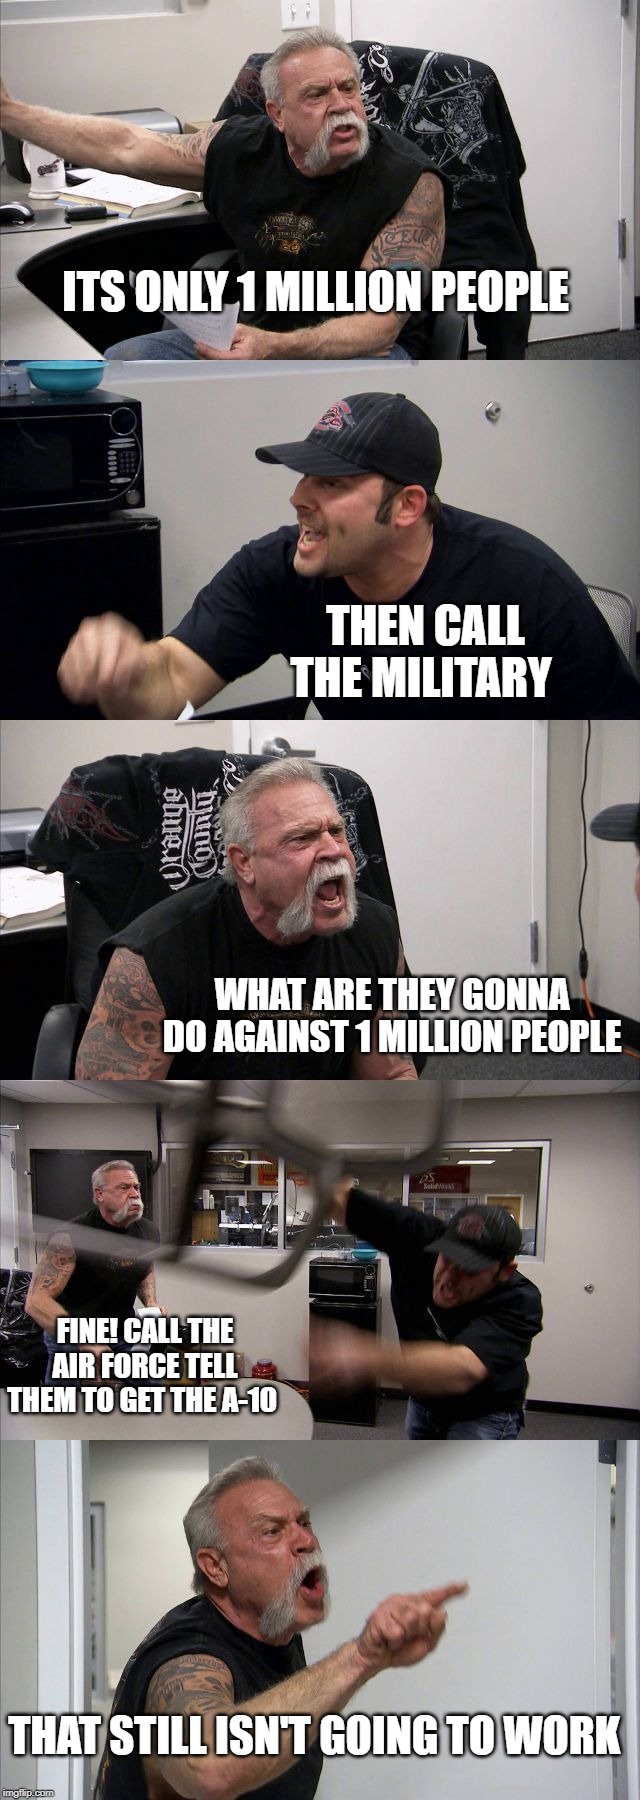 American Chopper Argument Meme | ITS ONLY 1 MILLION PEOPLE; THEN CALL THE MILITARY; WHAT ARE THEY GONNA DO AGAINST 1 MILLION PEOPLE; FINE! CALL THE AIR FORCE TELL THEM TO GET THE A-10; THAT STILL ISN'T GOING TO WORK | image tagged in memes,american chopper argument | made w/ Imgflip meme maker